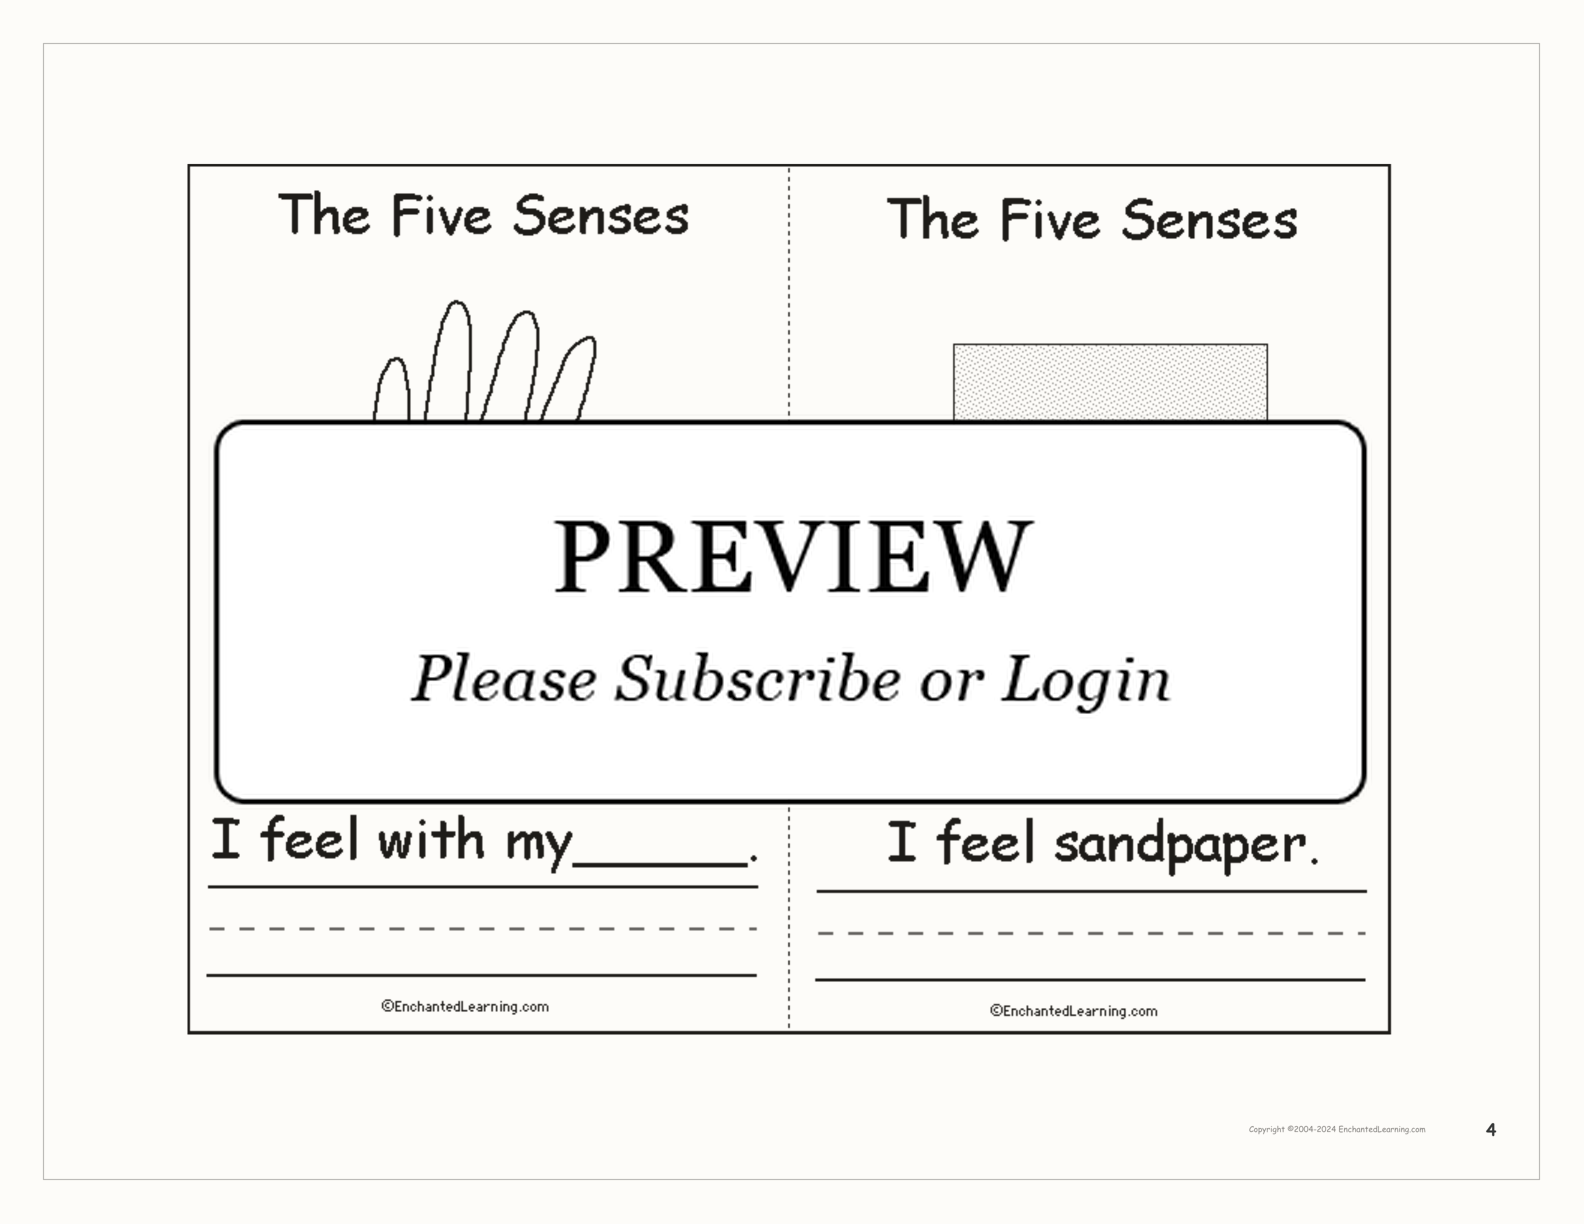 The Five Senses - Printable Book interactive worksheet page 4